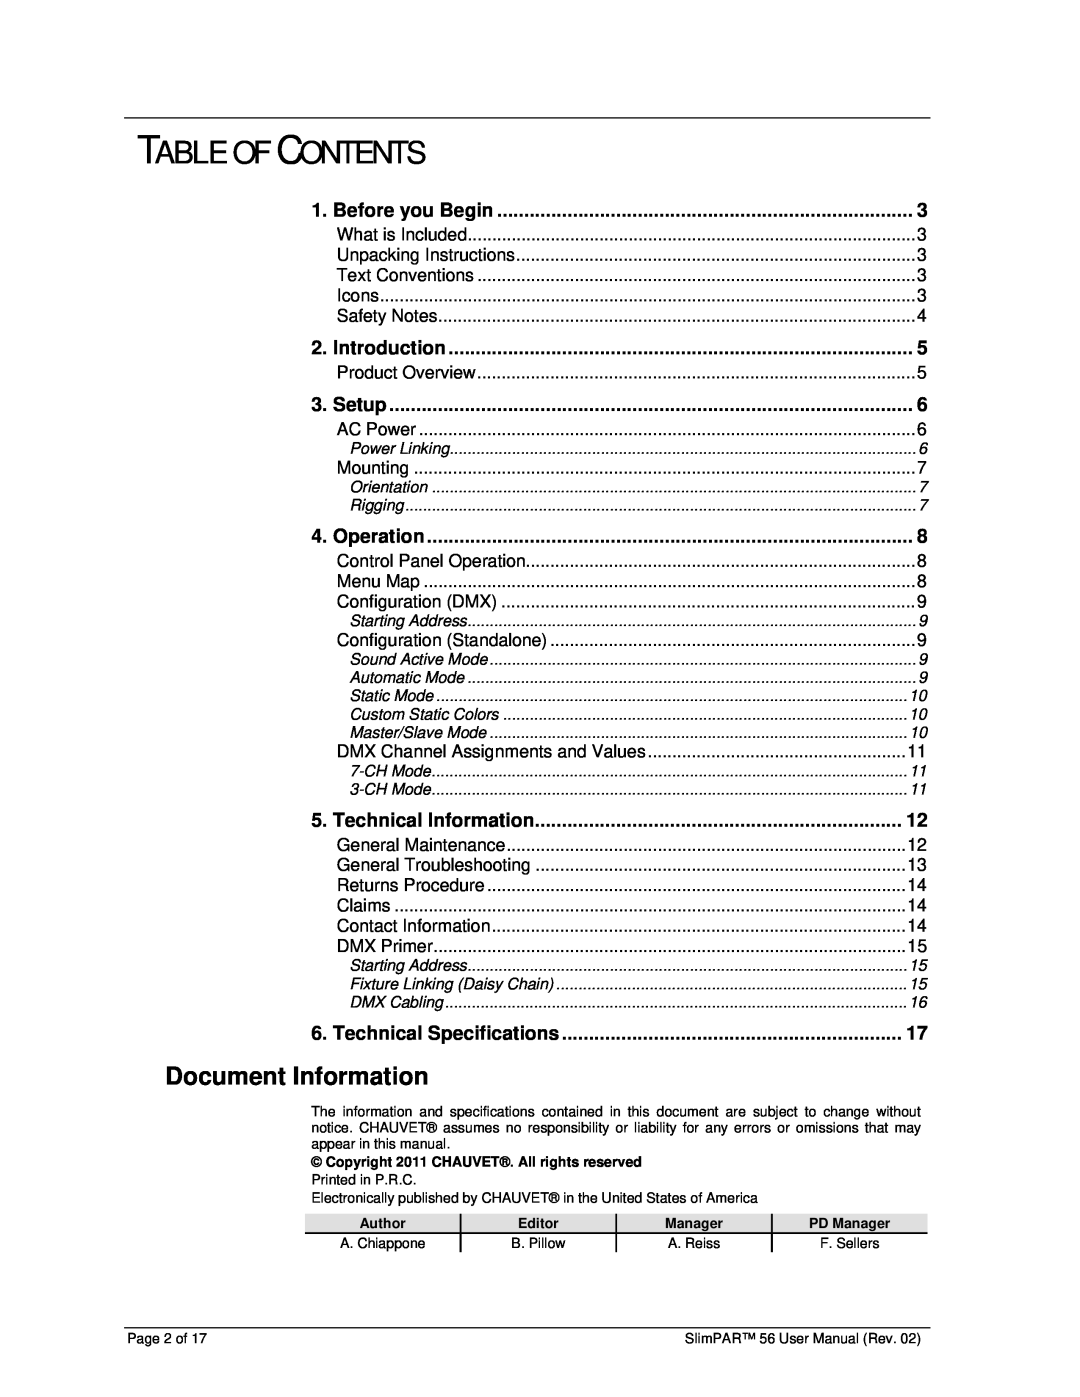 Chauvet 56 user manual Table Of Contents, Document Information, Introduction, Setup, Operation, Technical Information 